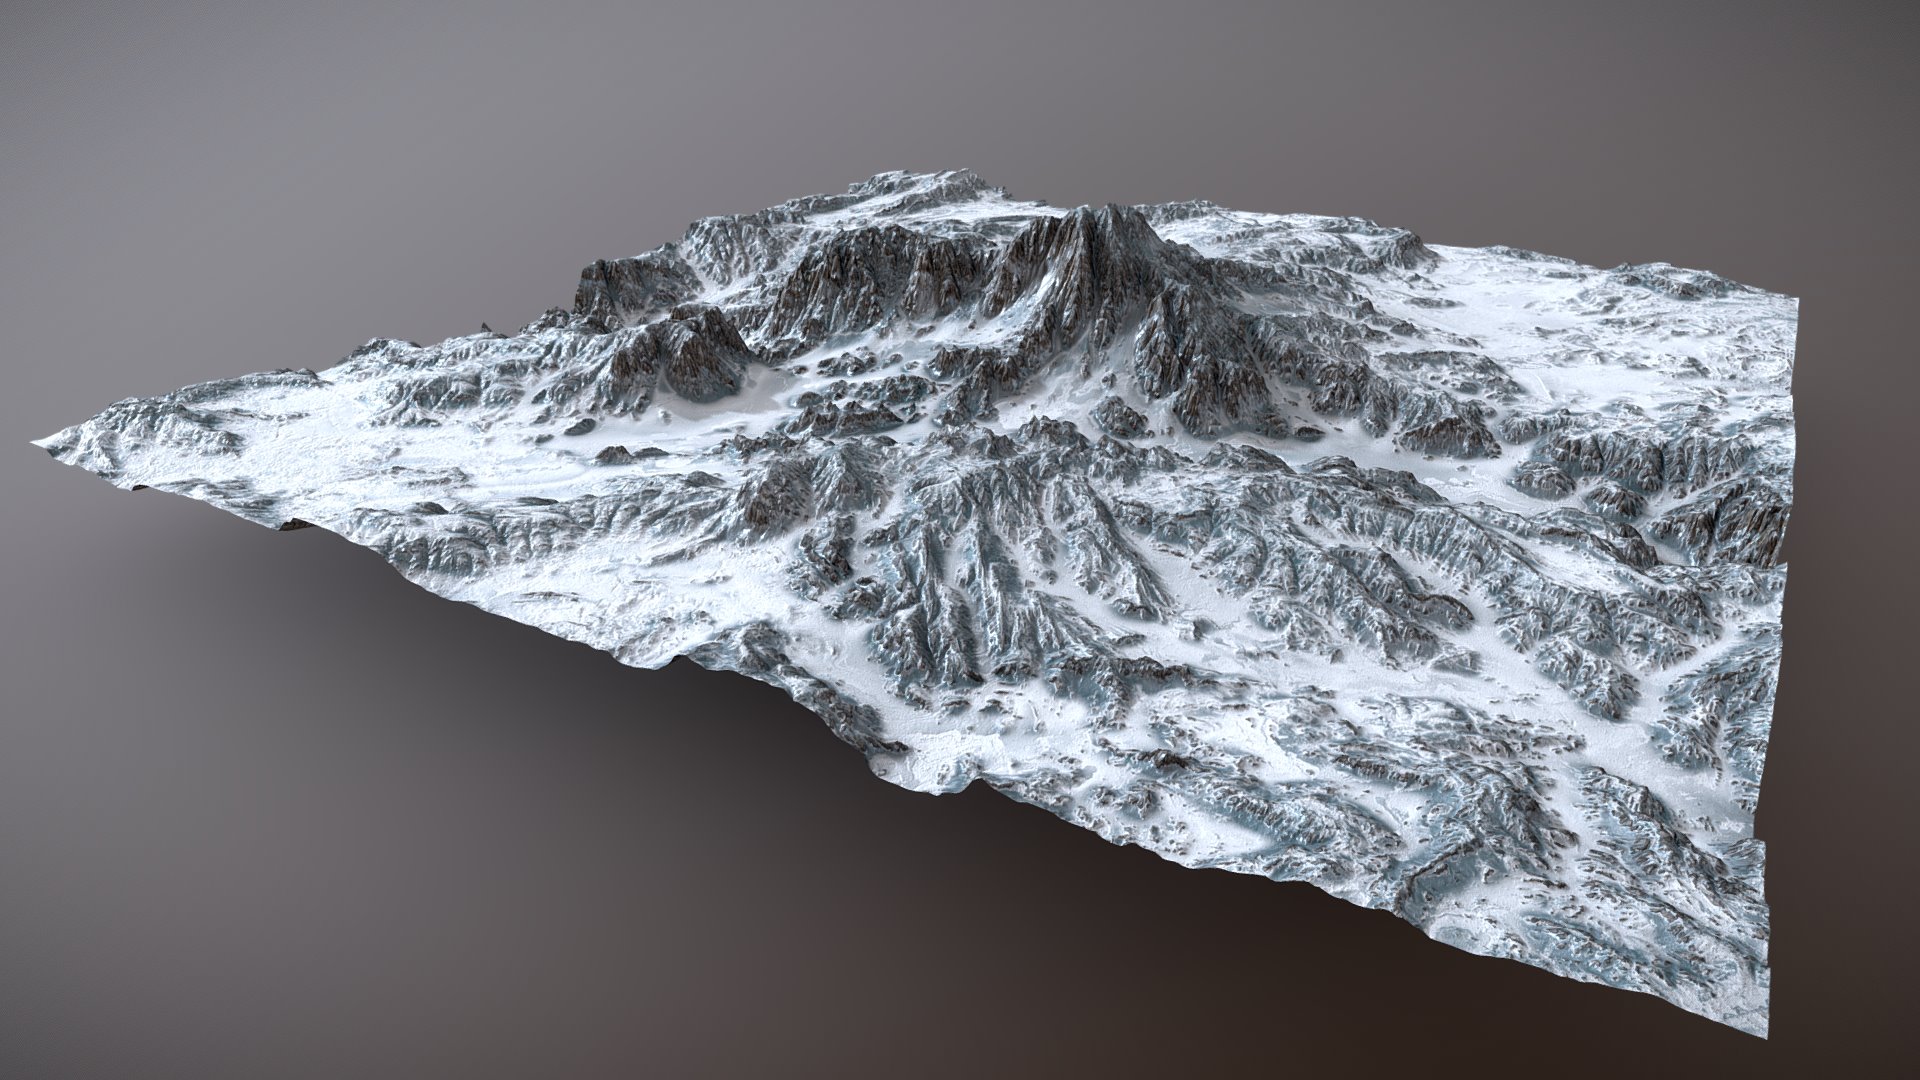 3D model Ice Landscape – Gaea - This is a 3D model of the Ice Landscape - Gaea. The 3D model is about a mountain covered in snow.